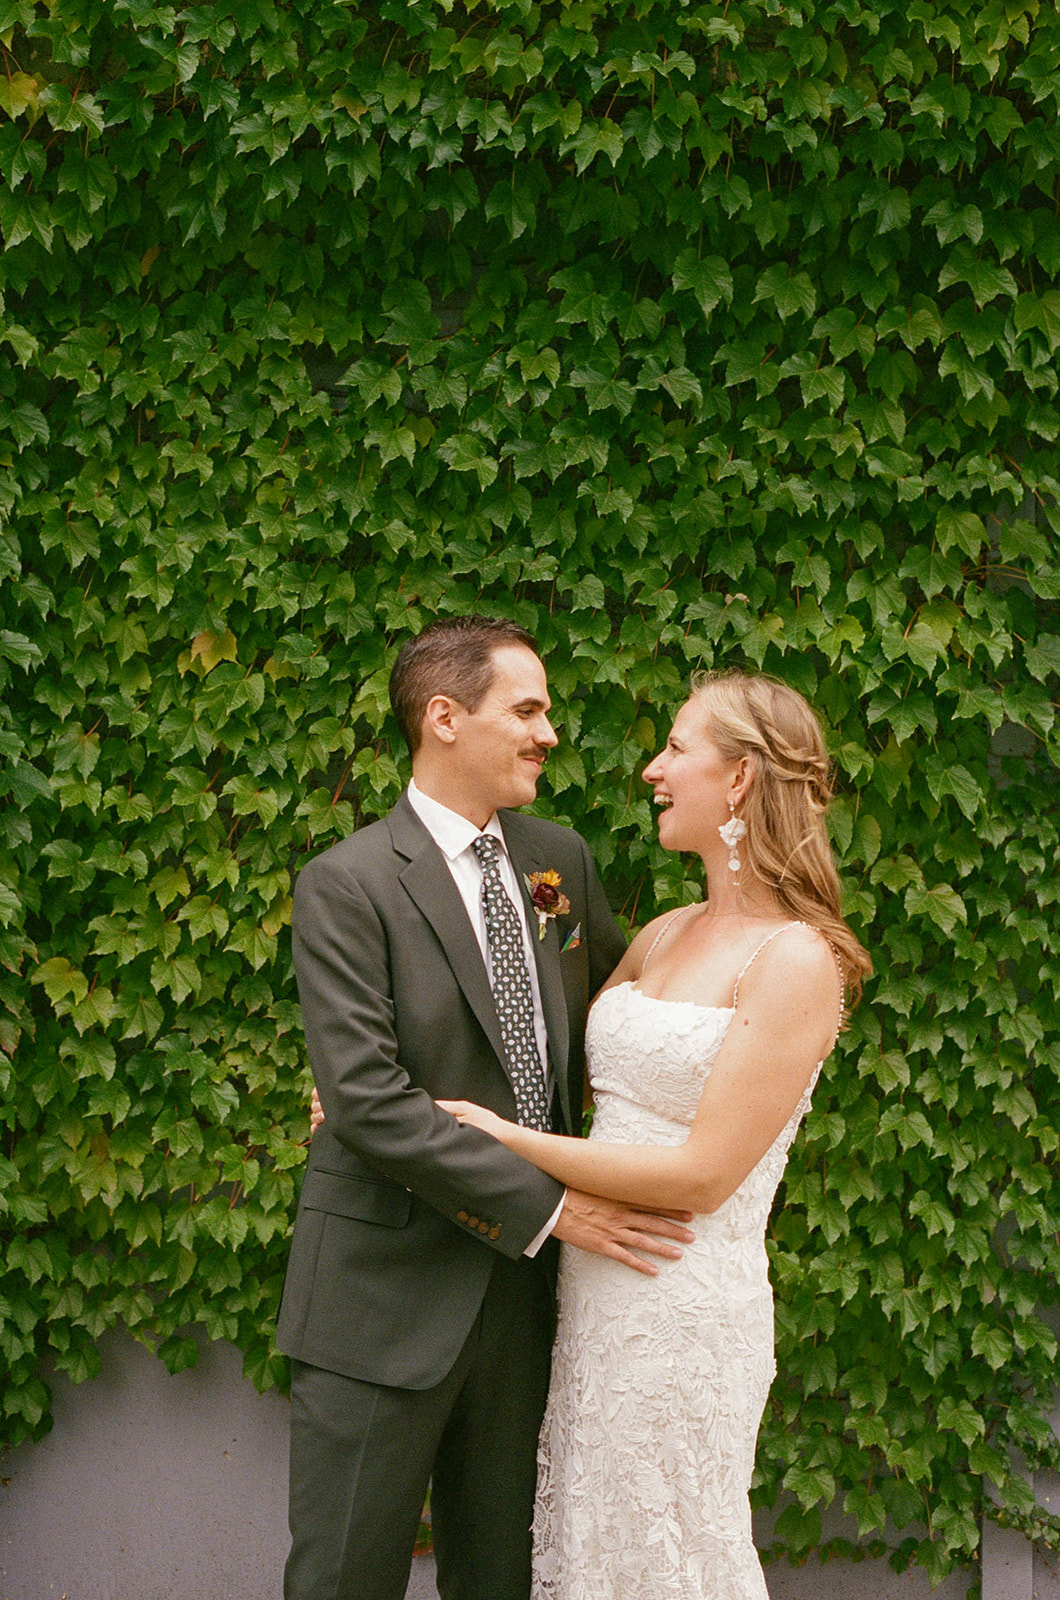 A bride and groom smile at each other outside a vine-covered wedding venue in Milwaukee.